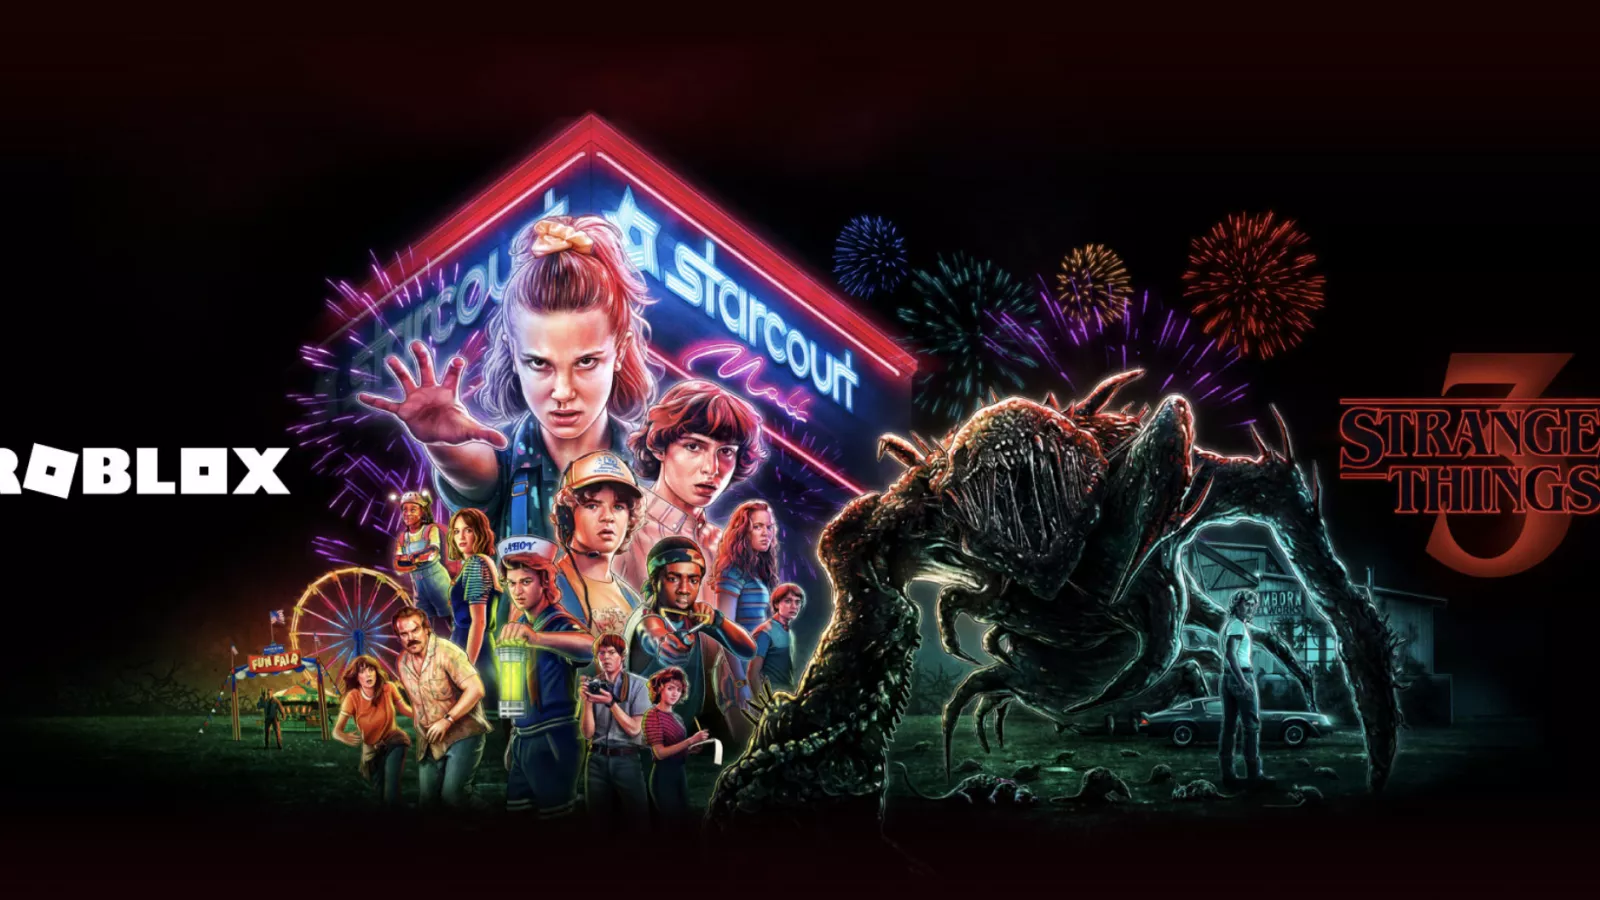 Roblox 'Stranger Things' Event Promo Codes: Get Rats, Mall Outfit